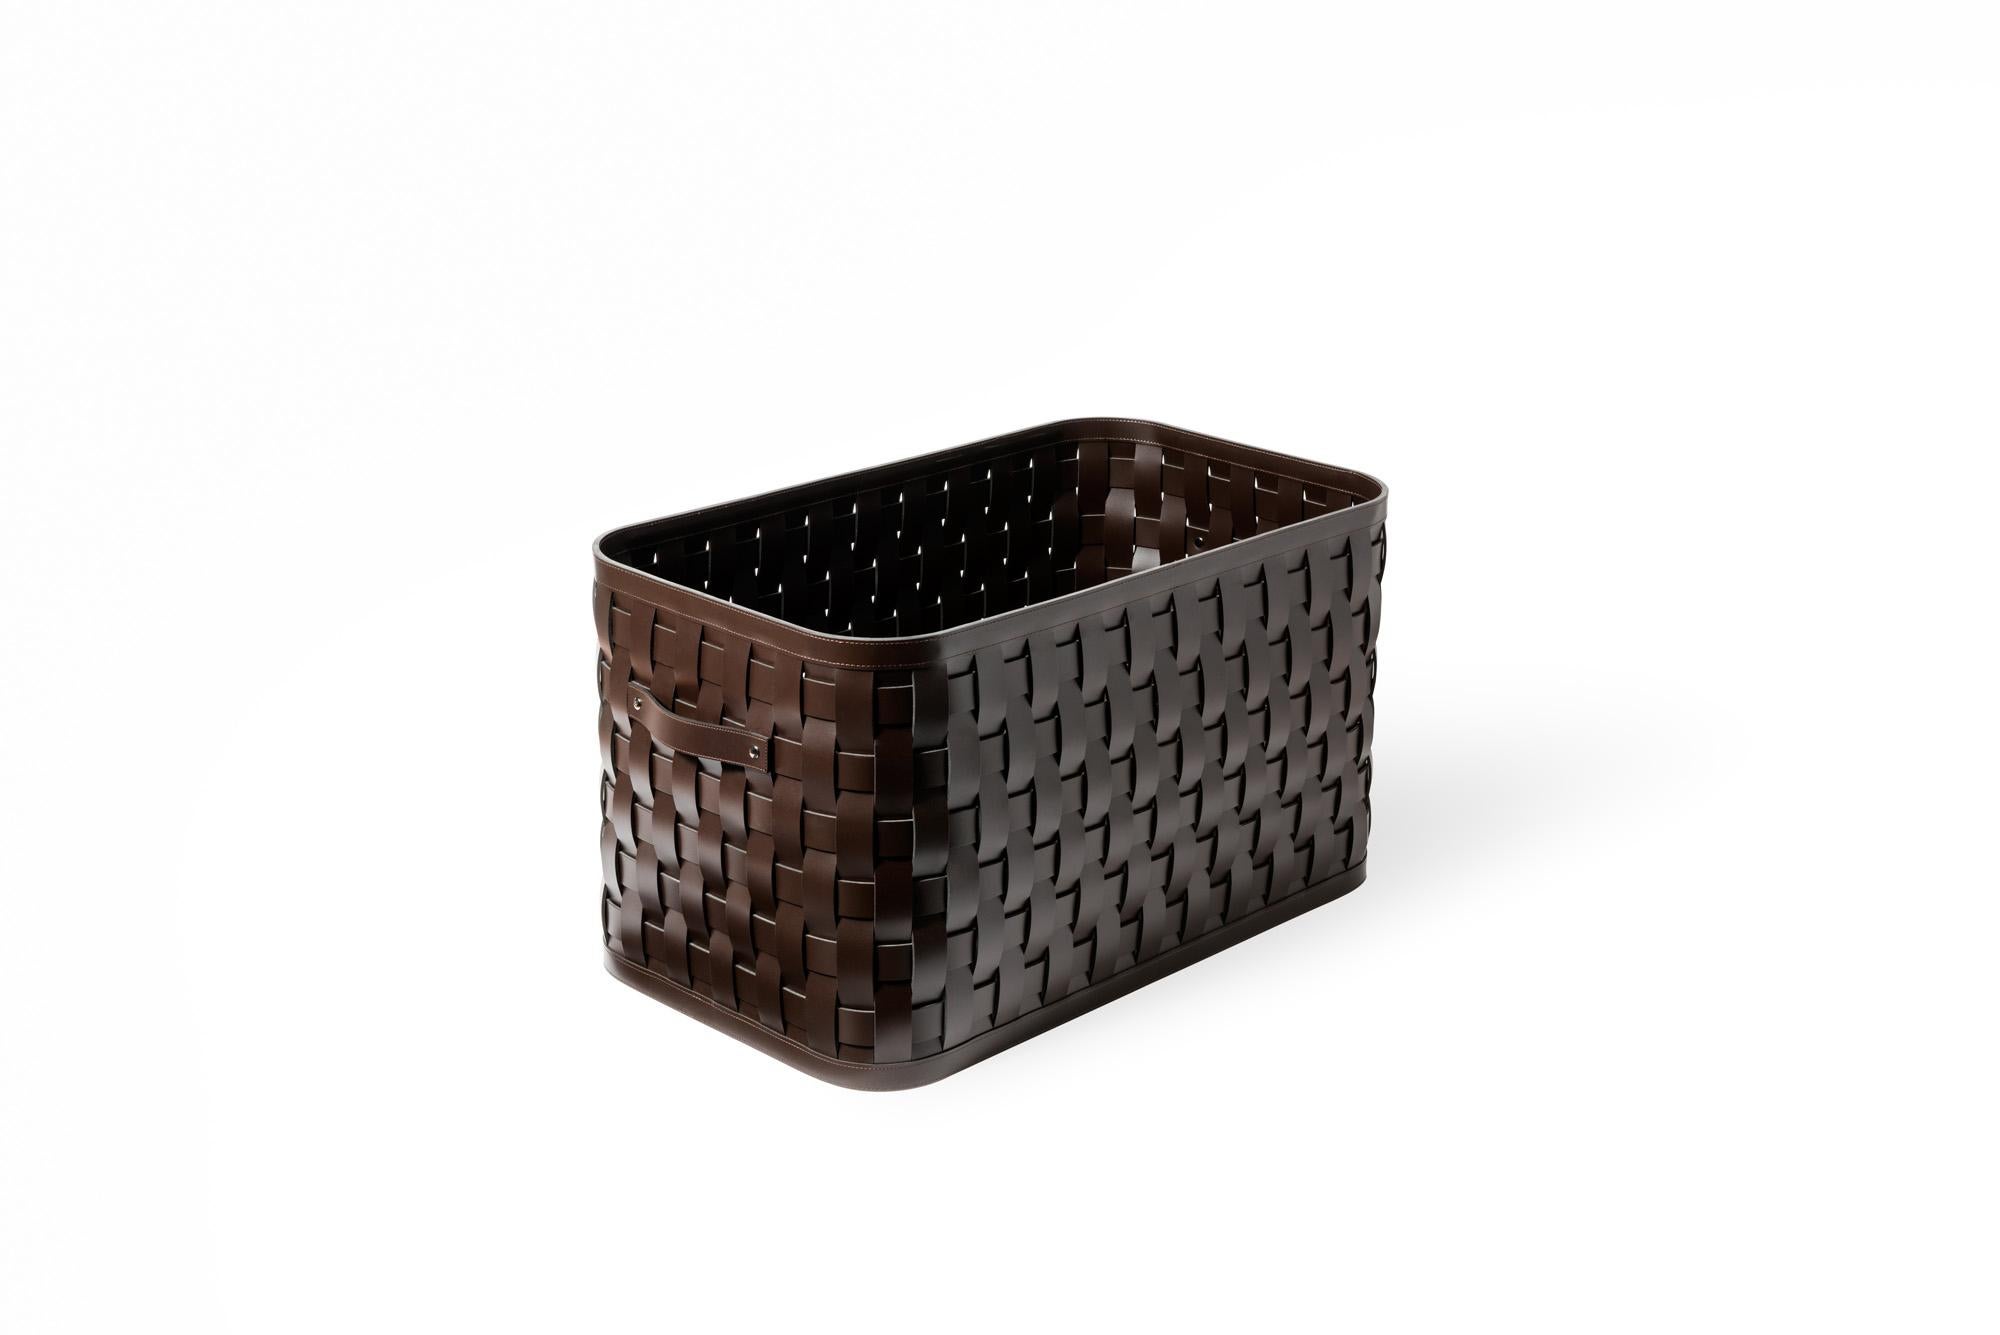 Part of the Demetra series, this big basket is made of high quality, durable, eco-friendly handwoven leather and features a lid of the same color. This versatile basket offers an elegant solution to all the storage needs around the house: in the